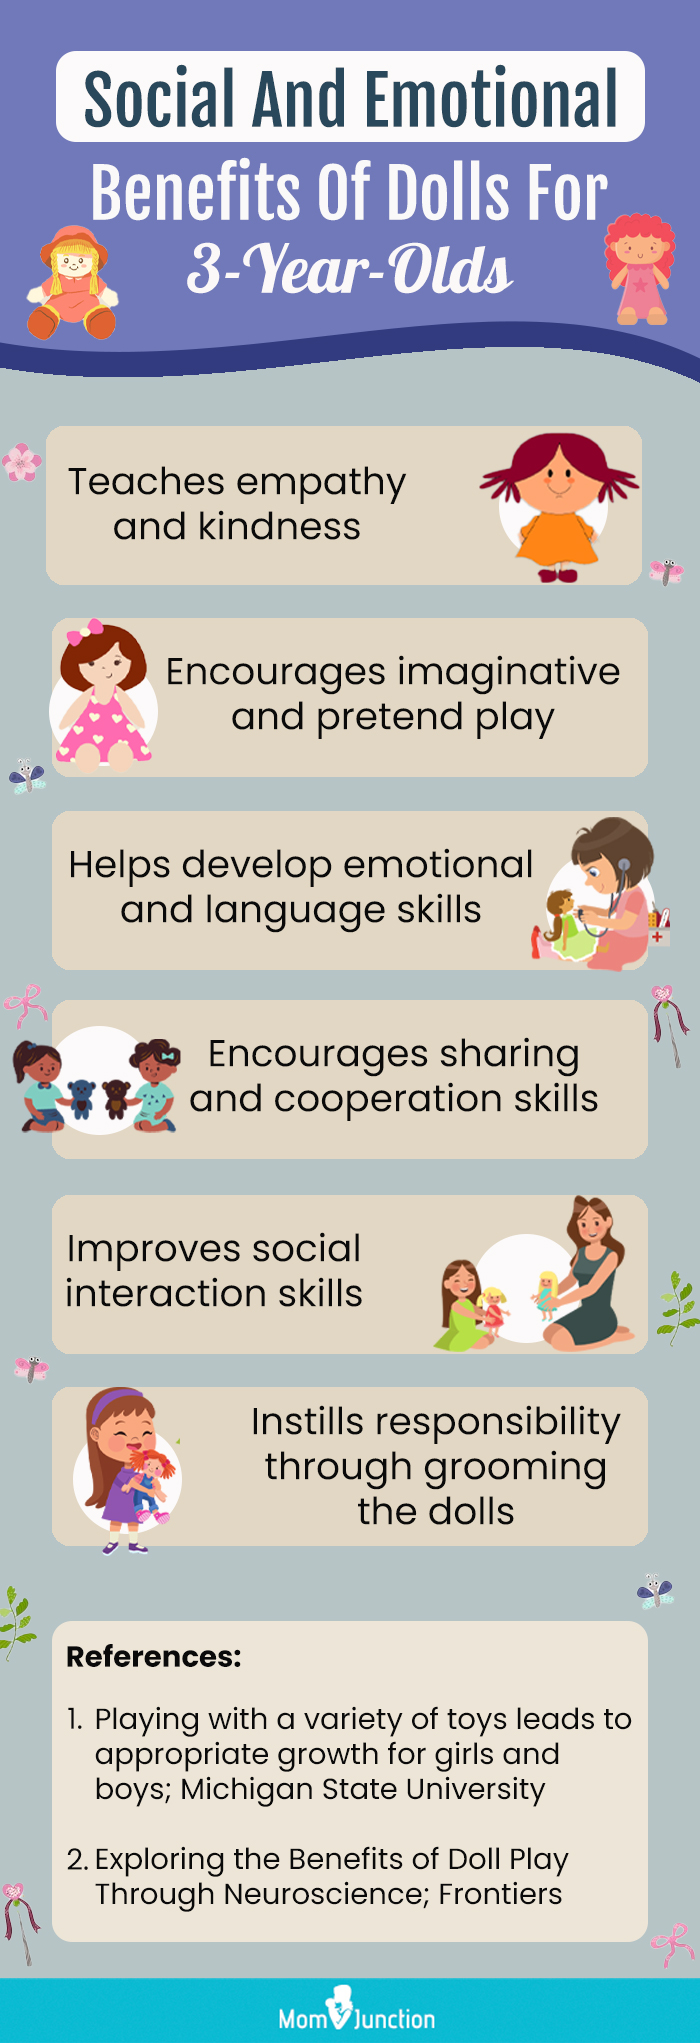 Social And Emotional Benefits Of Dolls For 3-Year-Olds (infographic)